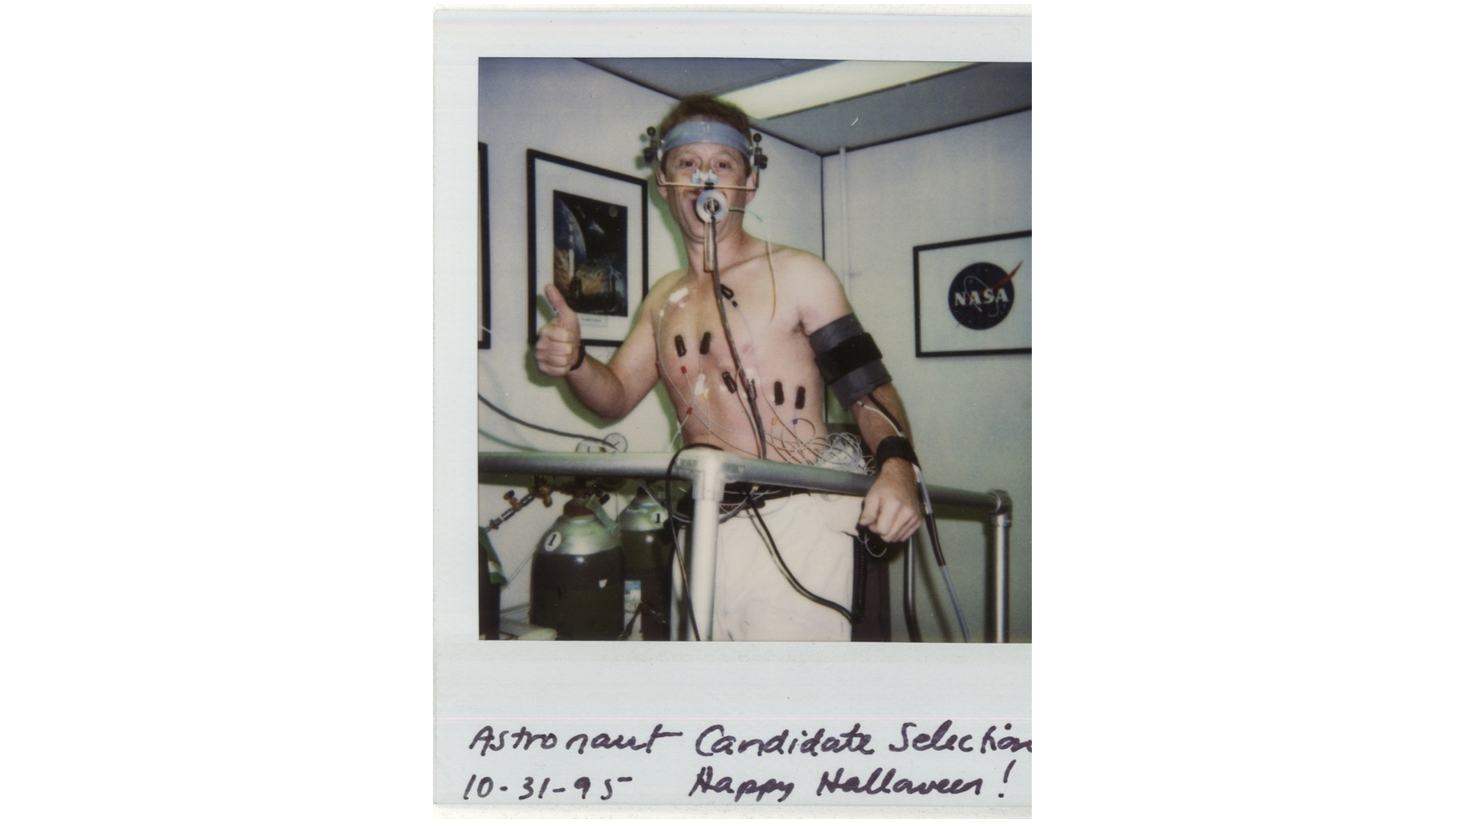 a shirtless man with electrodes attached to his chest gives a thumbs-up while on a treadmill in a white-walled room.